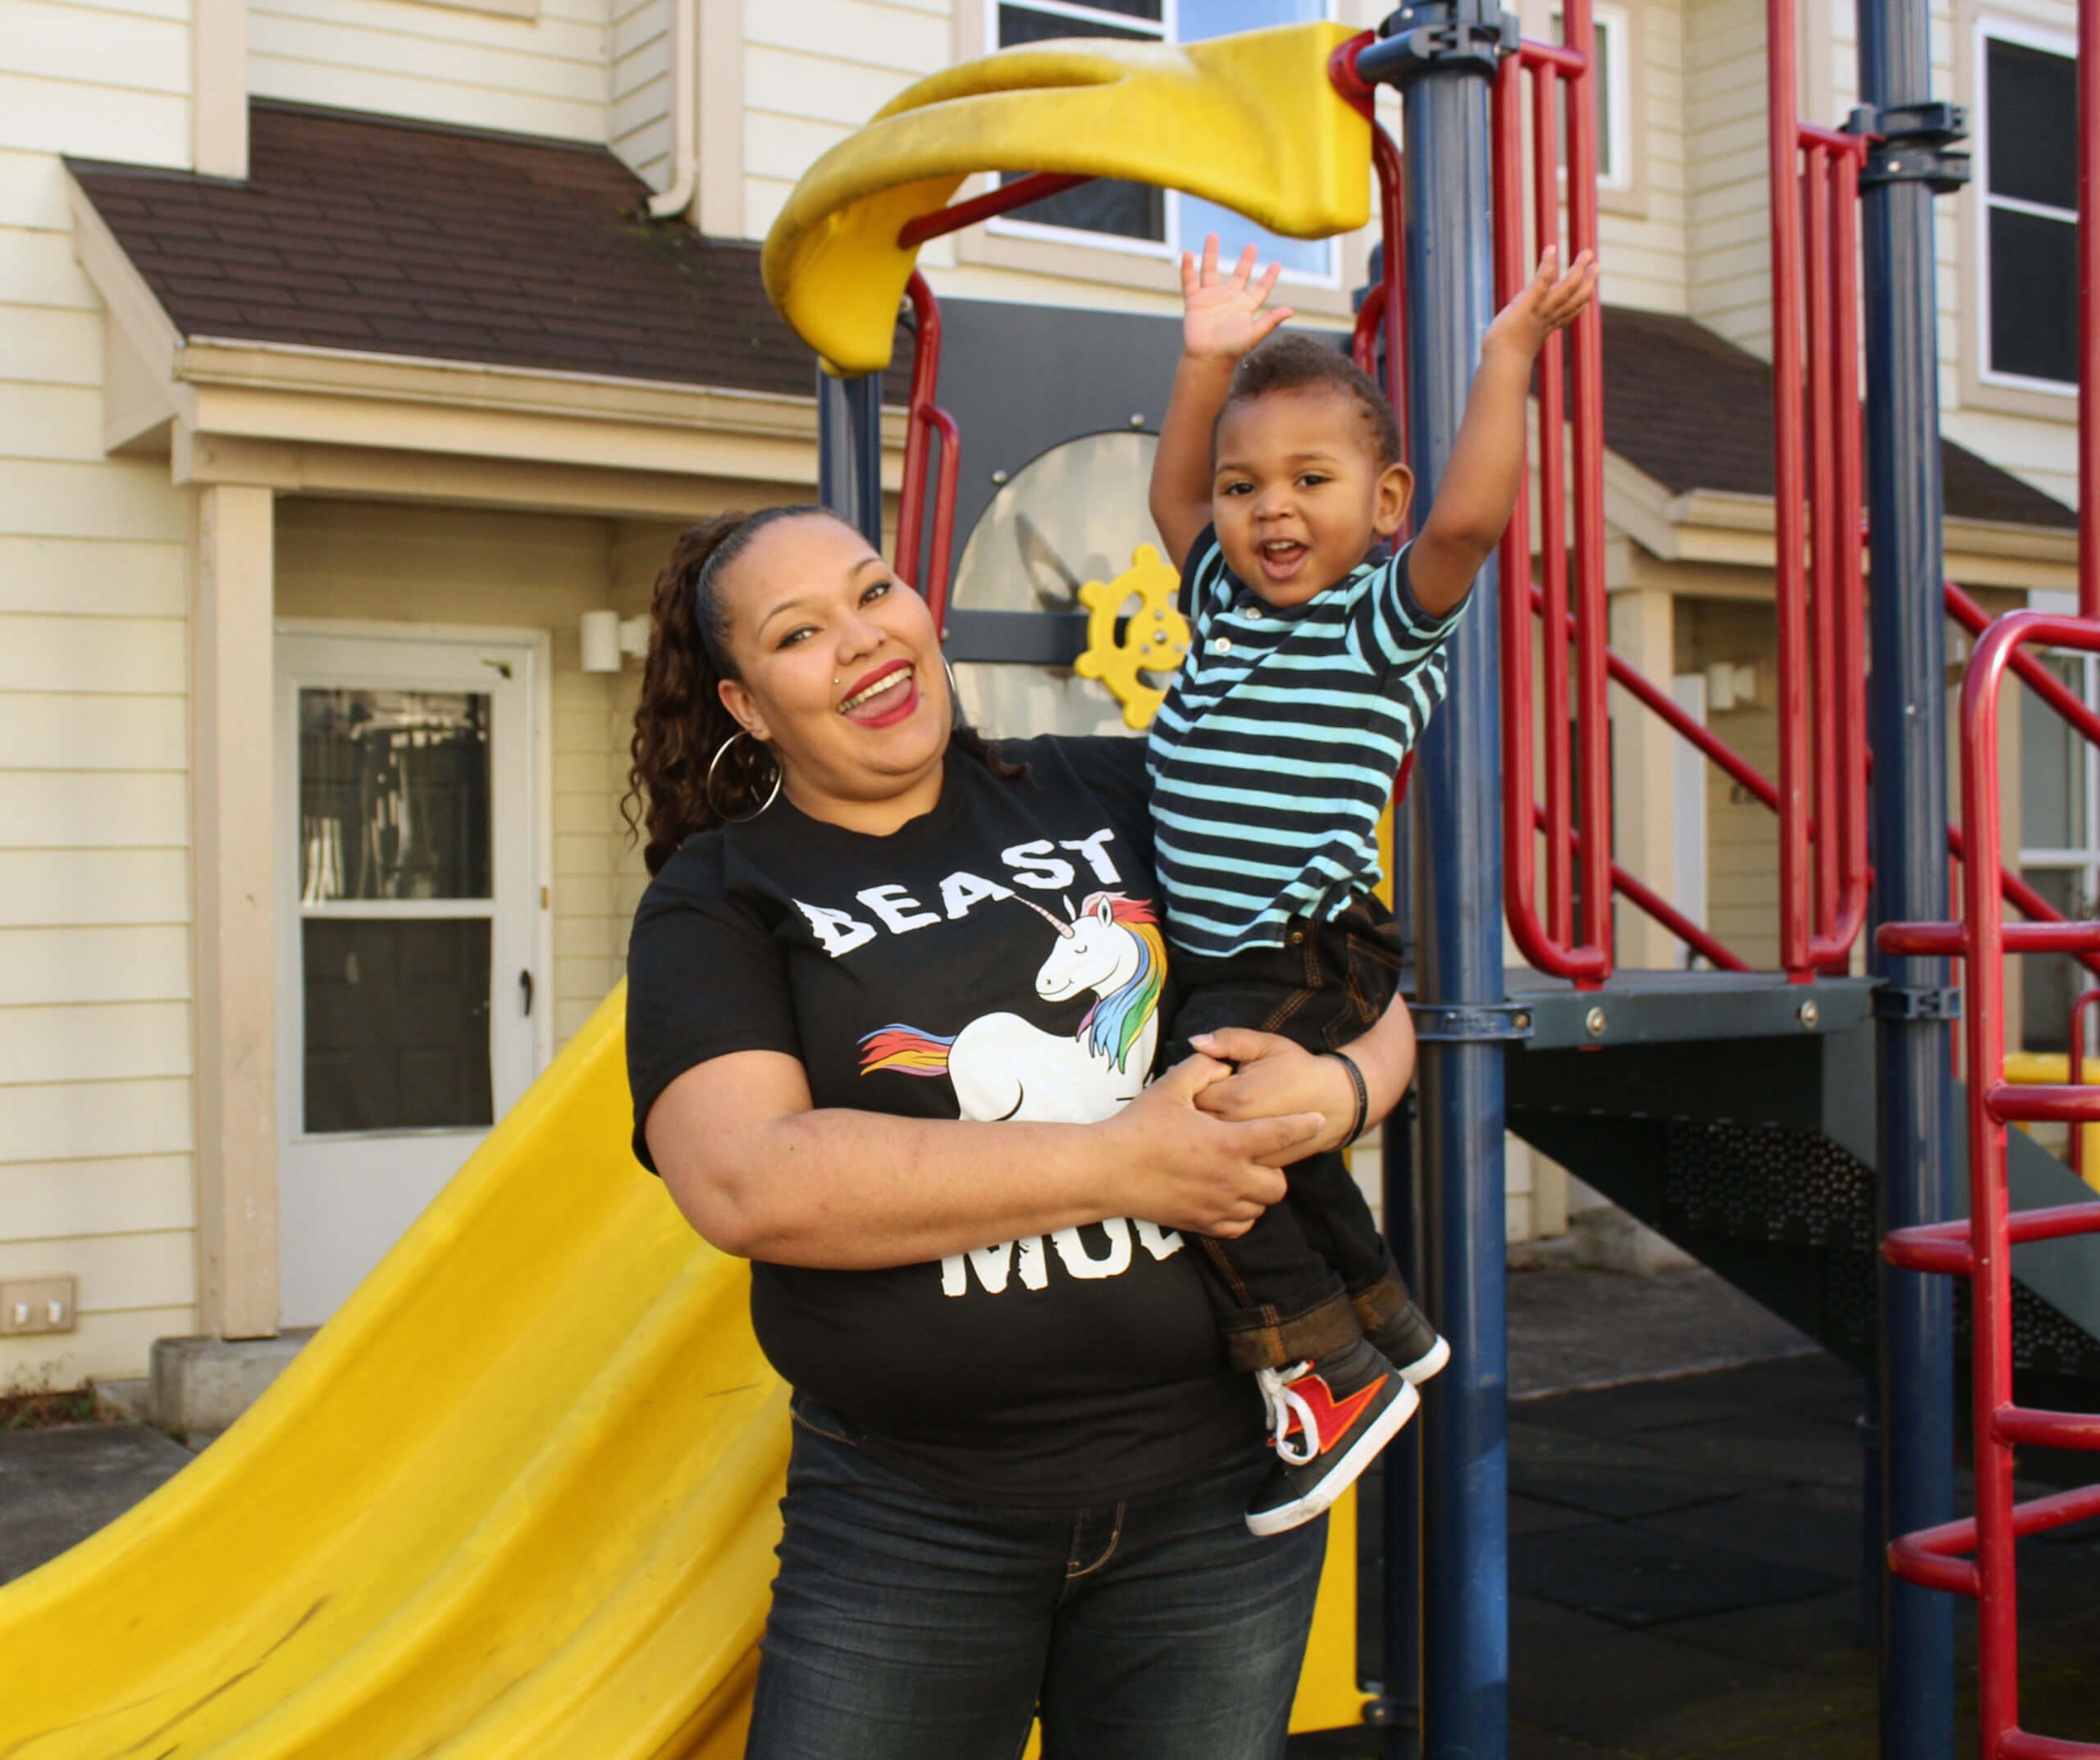 Client Celeste holding a child in front of playgroud